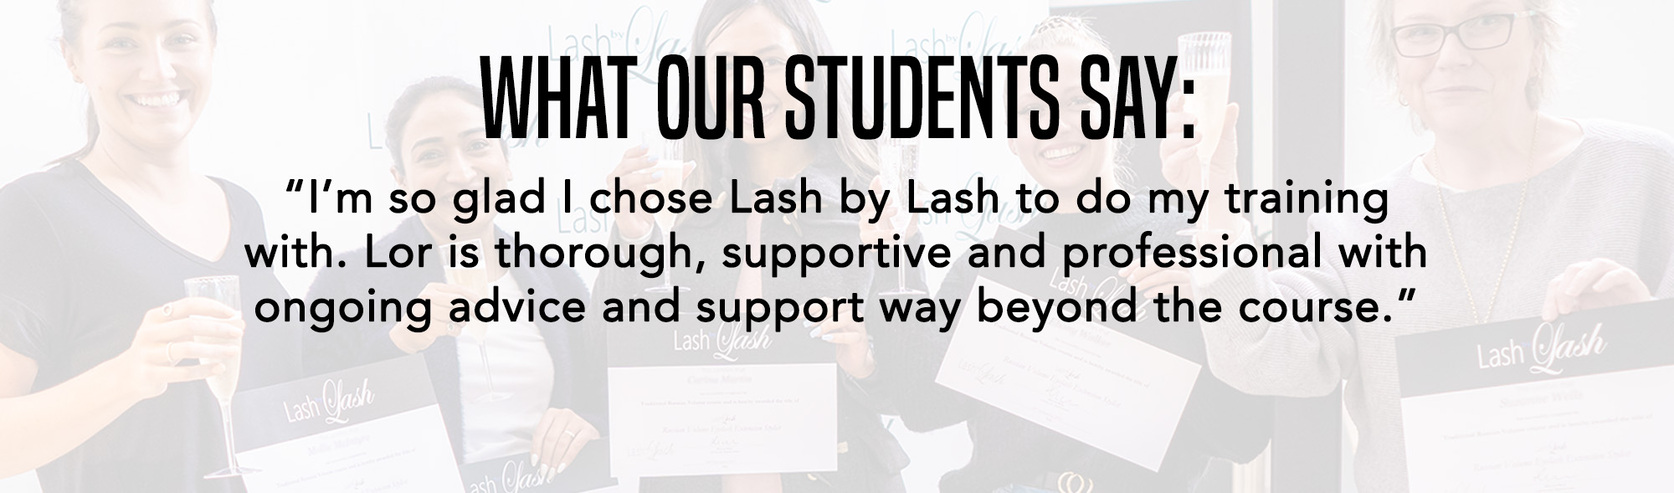 WHAT OUR STUDENTS SAY: